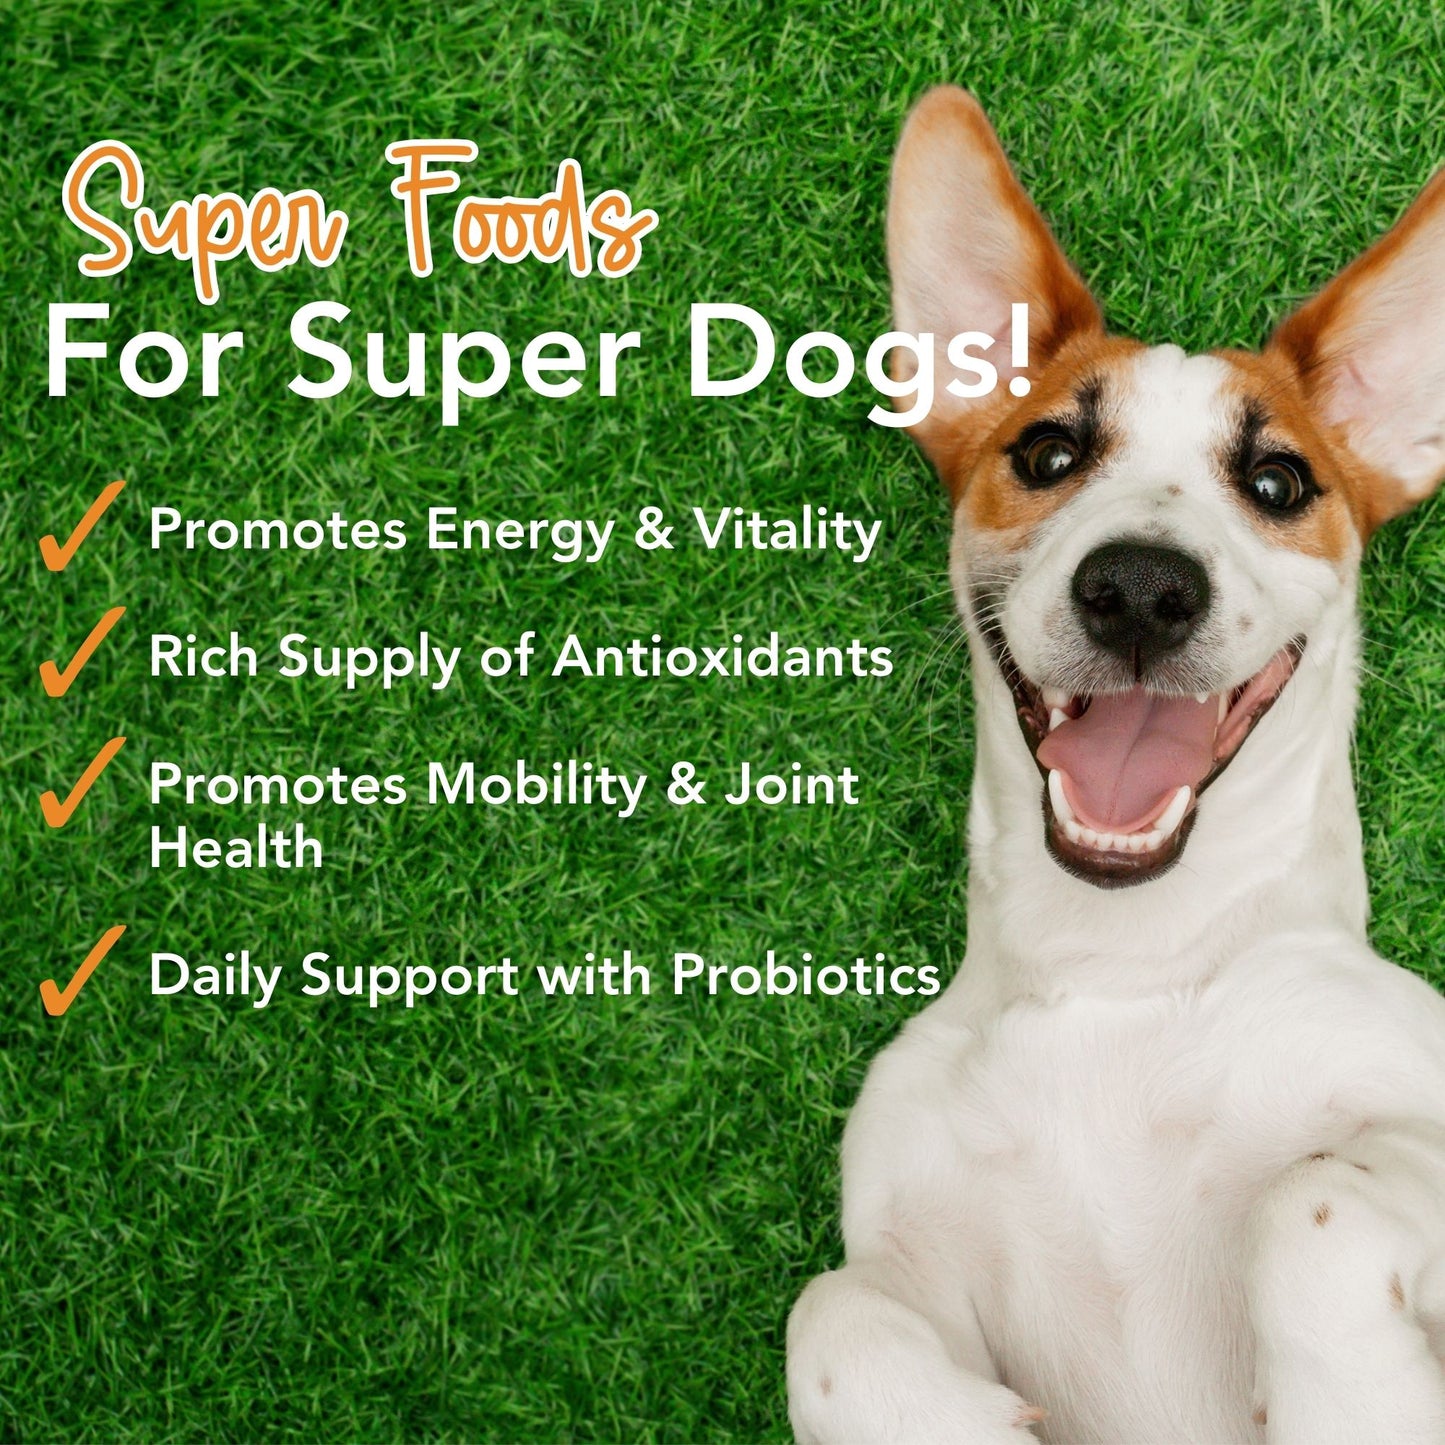 BUY 2 JARS & SAVE Super-Greens: Vitamin, Mineral & Probiotic Supplement for Dogs with Spirulina, Kelp, Green Tea, Spinach, Chlorella, & Brocolli Sprouts - 90 Scoops